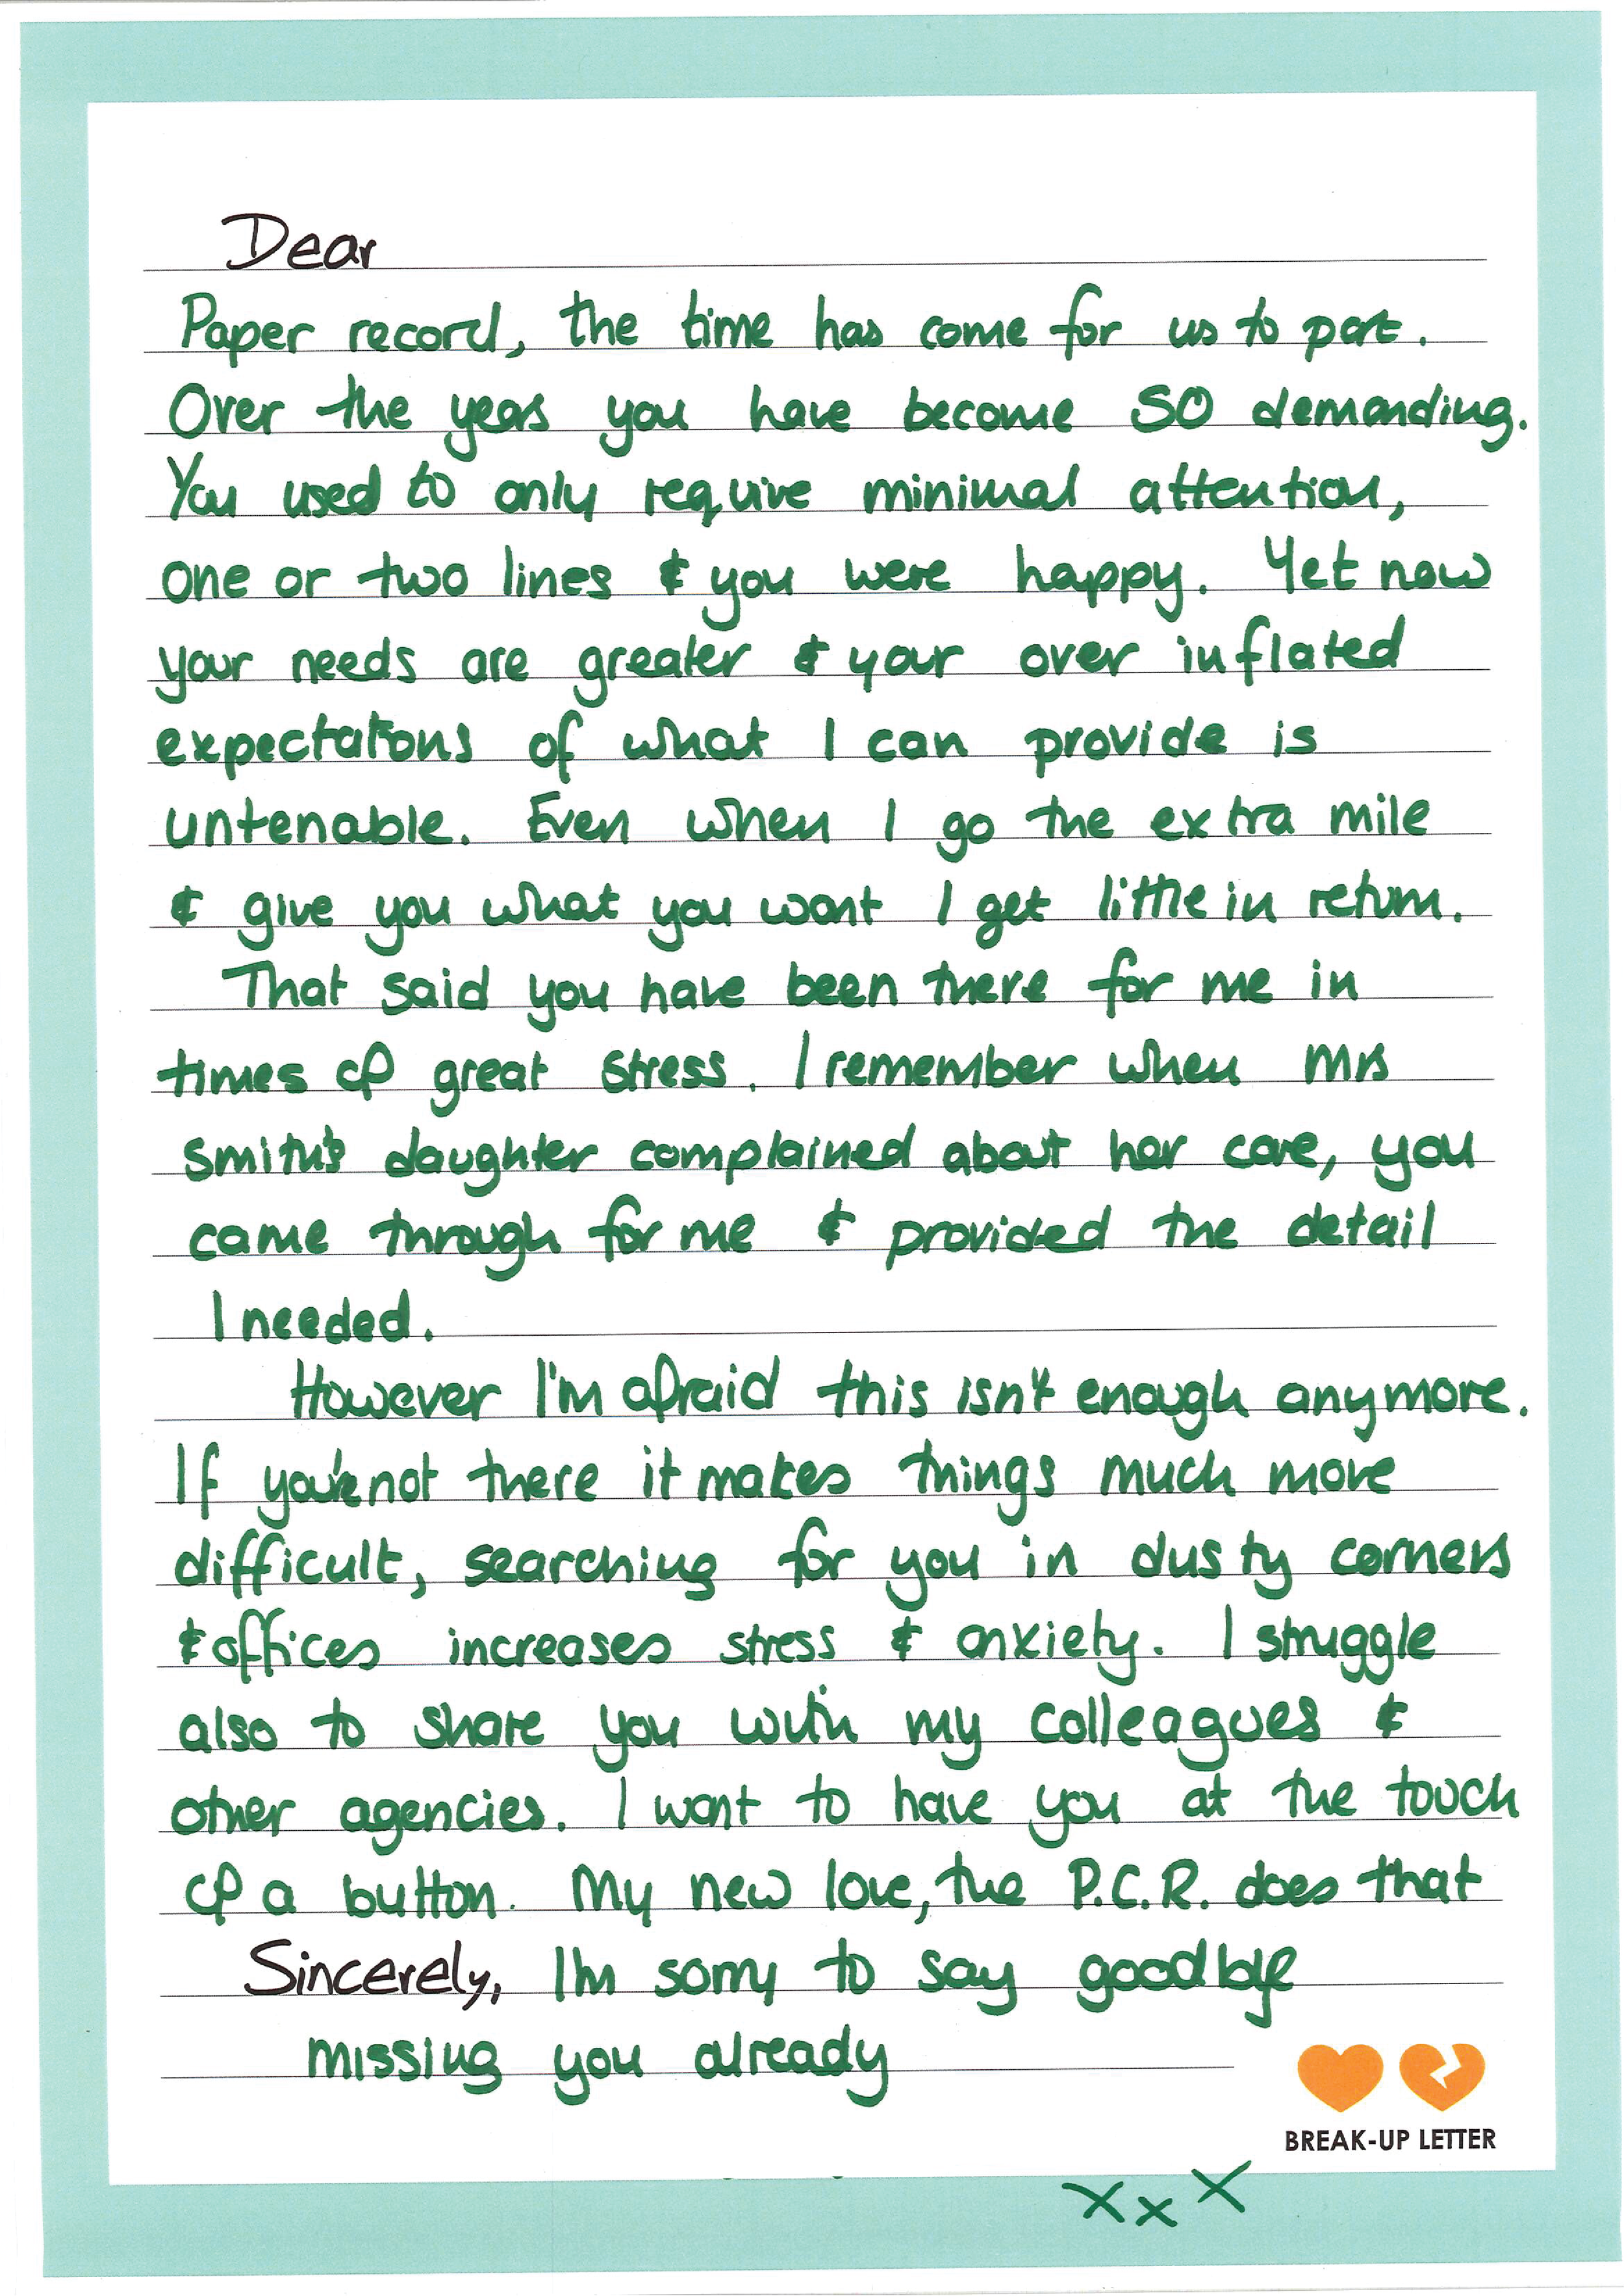 letters-03.png